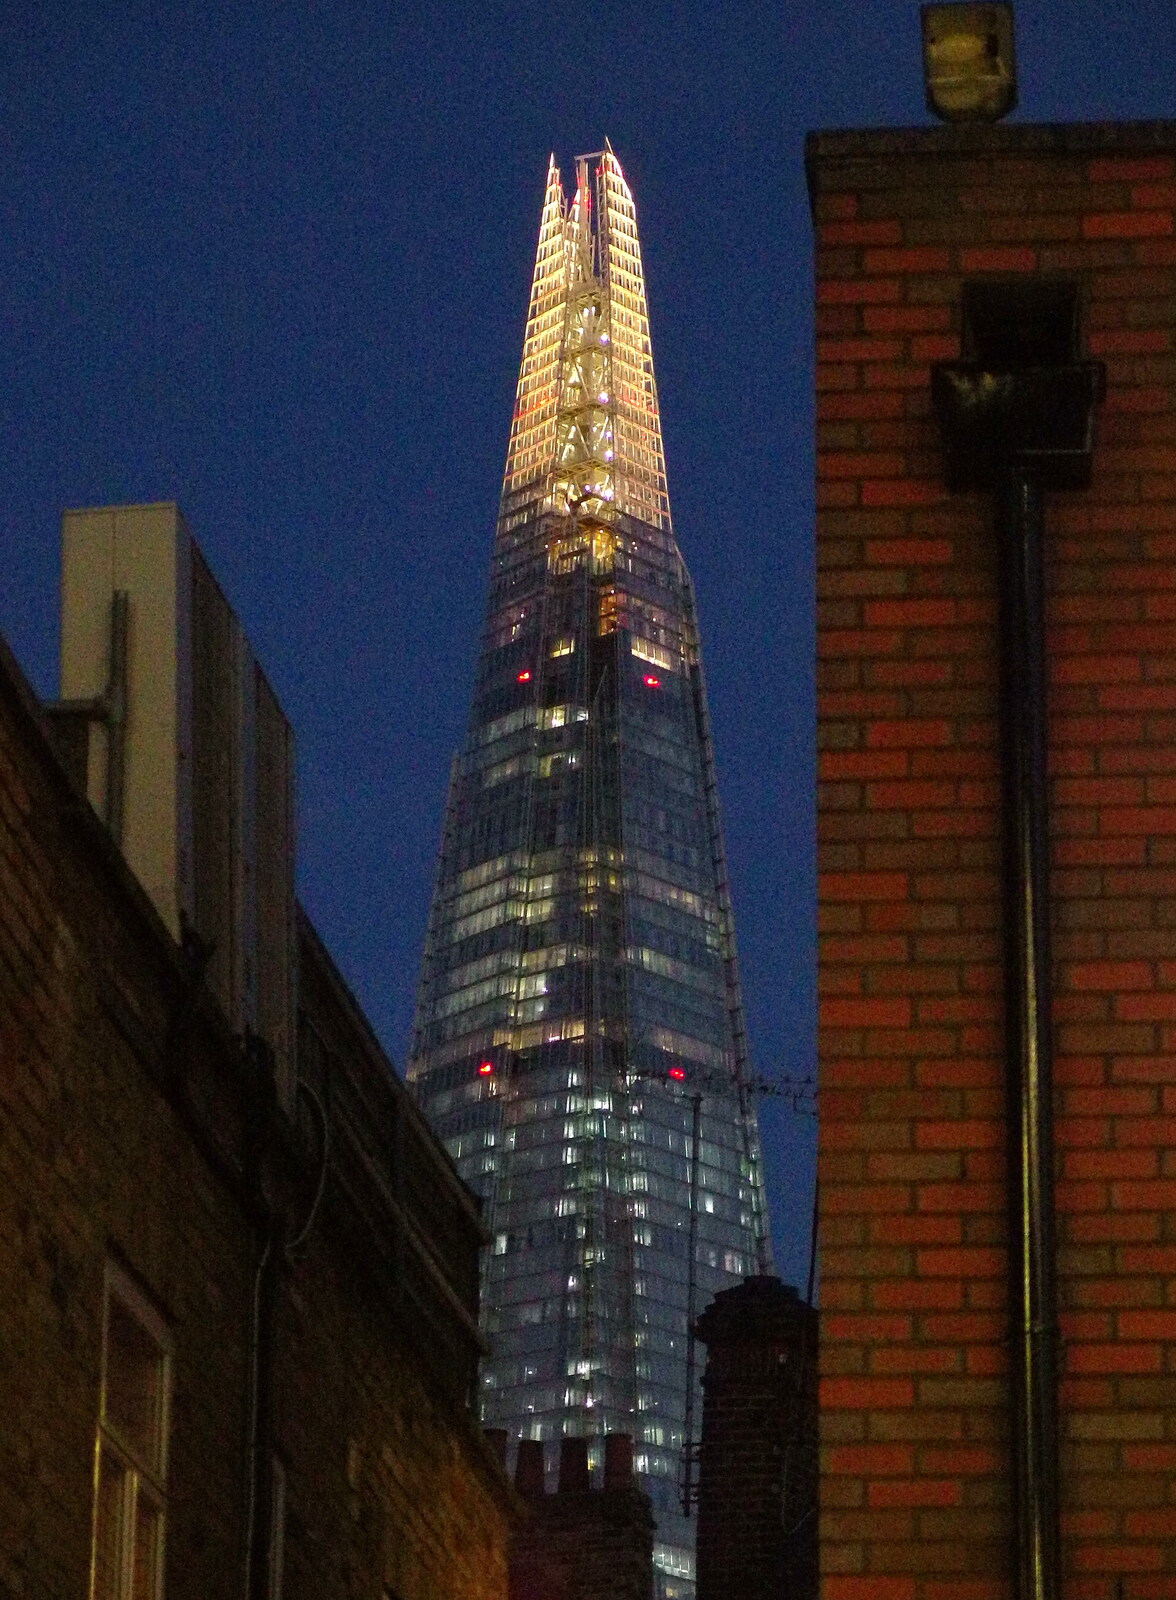 SwiftKey's Arcade Cabinet, and the Streets of Southwark, London - 5th December 2013: The Shard, lit up in the dusk